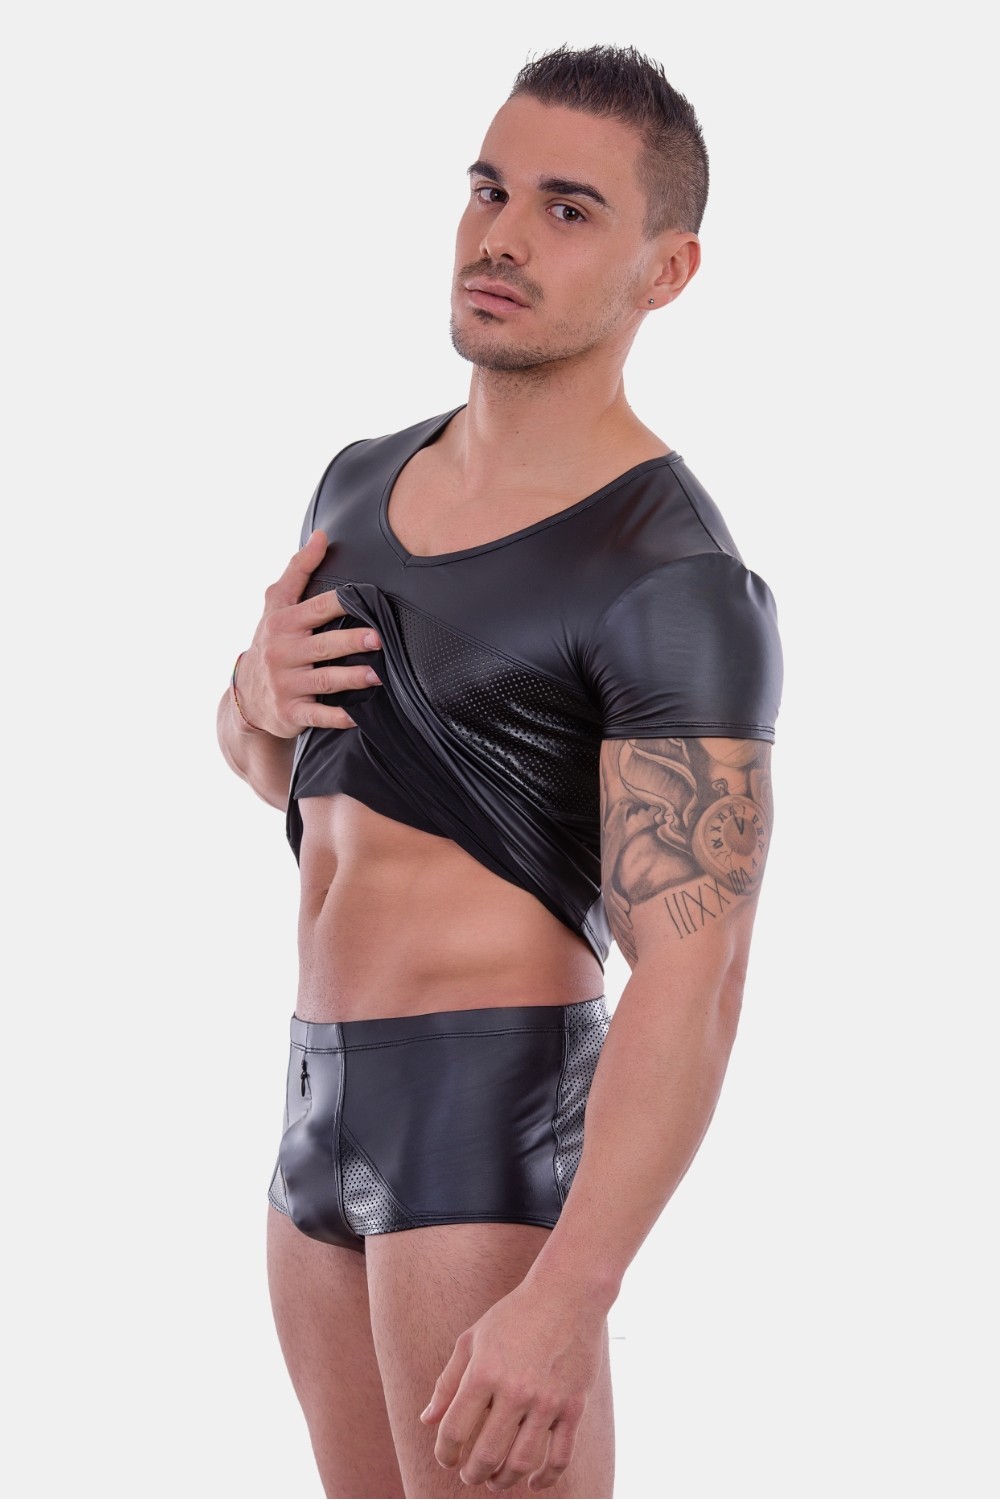 David, fetish faux leather trunks - Patrice Catanzaro Official Website